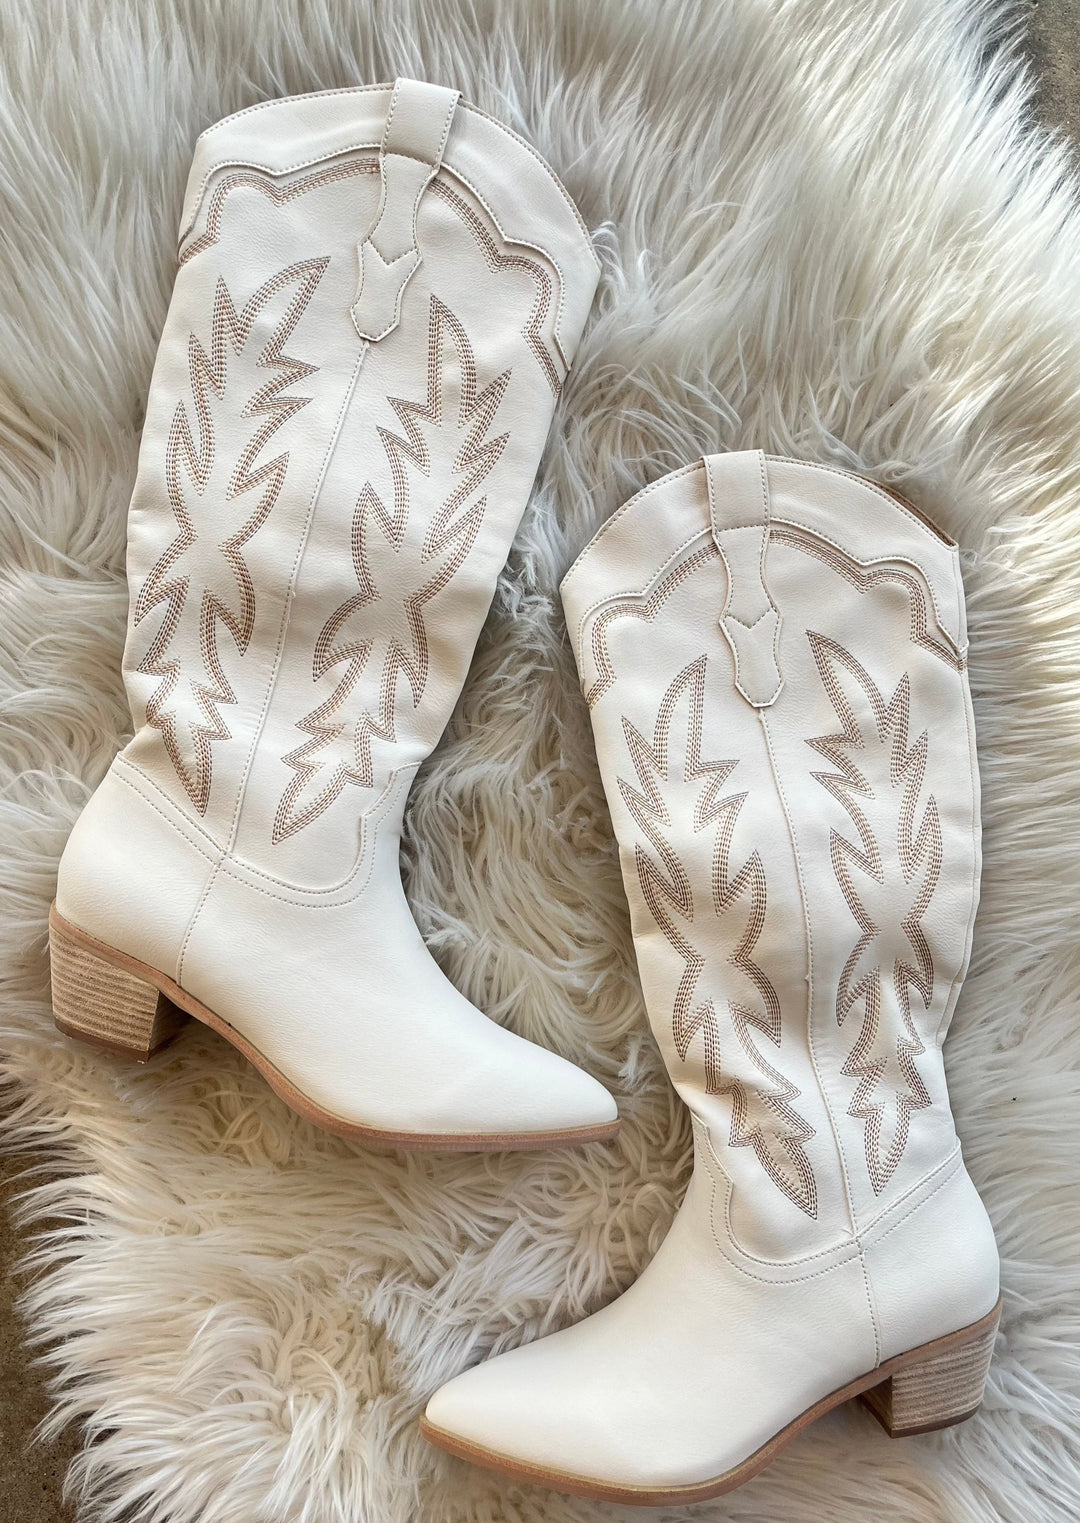 Samantha Boots, Shoes, Miracle Miles, Adeline, dallas boutique, dallas texas, texas boutique, women's boutique dallas, adeline boutique, dallas boutique, trendy boutique, affordable boutique